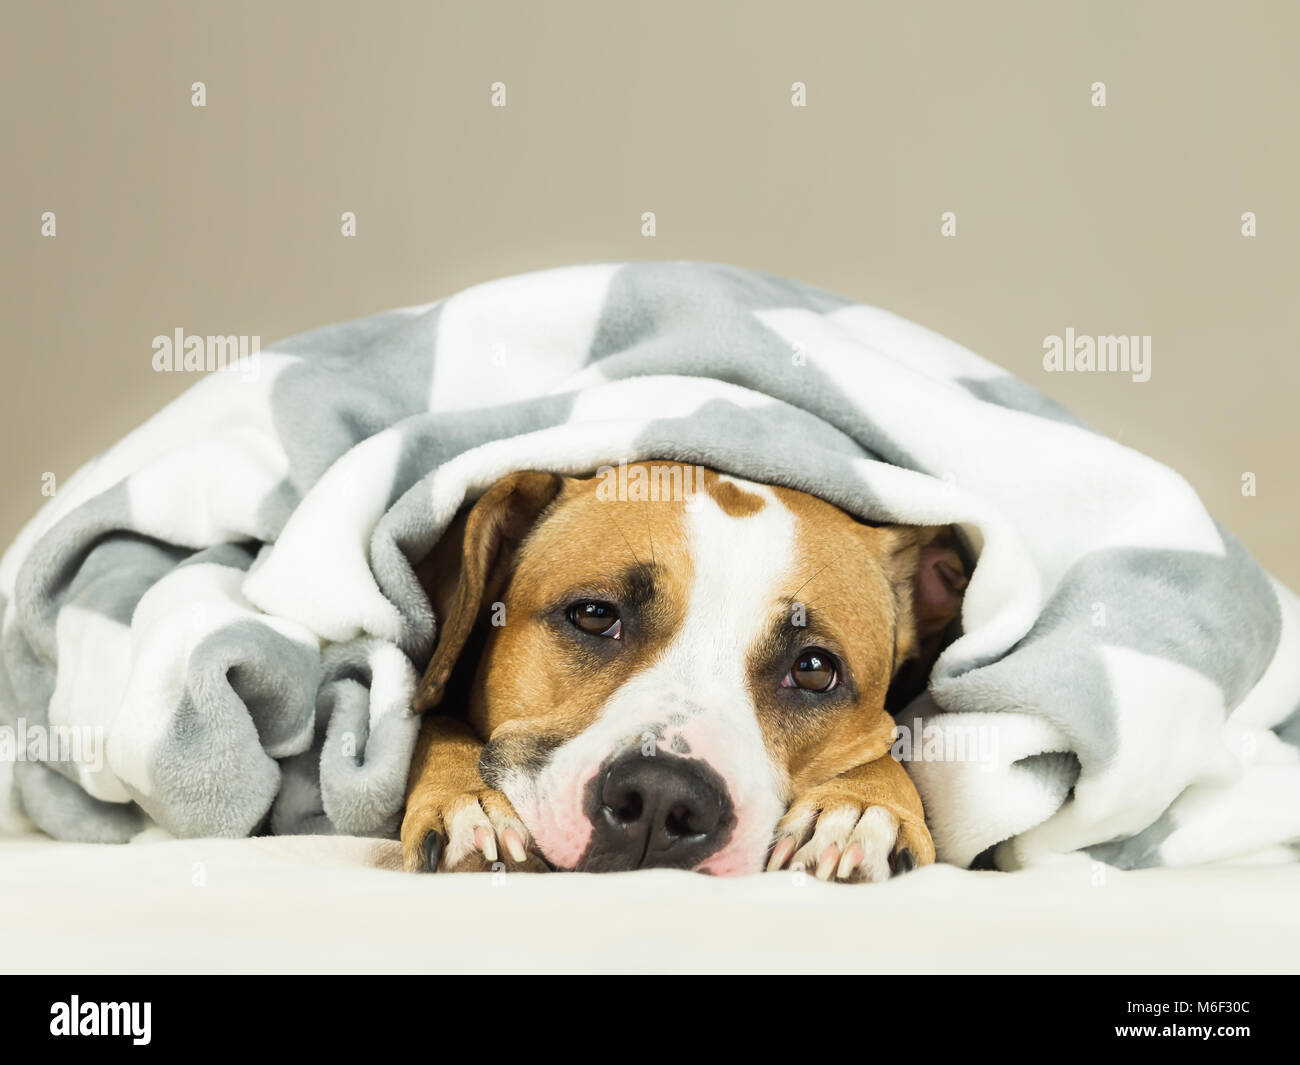 Funny young staffordshire terrier puppy lying covered in throw blanket and falling asleep. Close up image of tired or sick pitbull dog sleeping or res Stock Photo